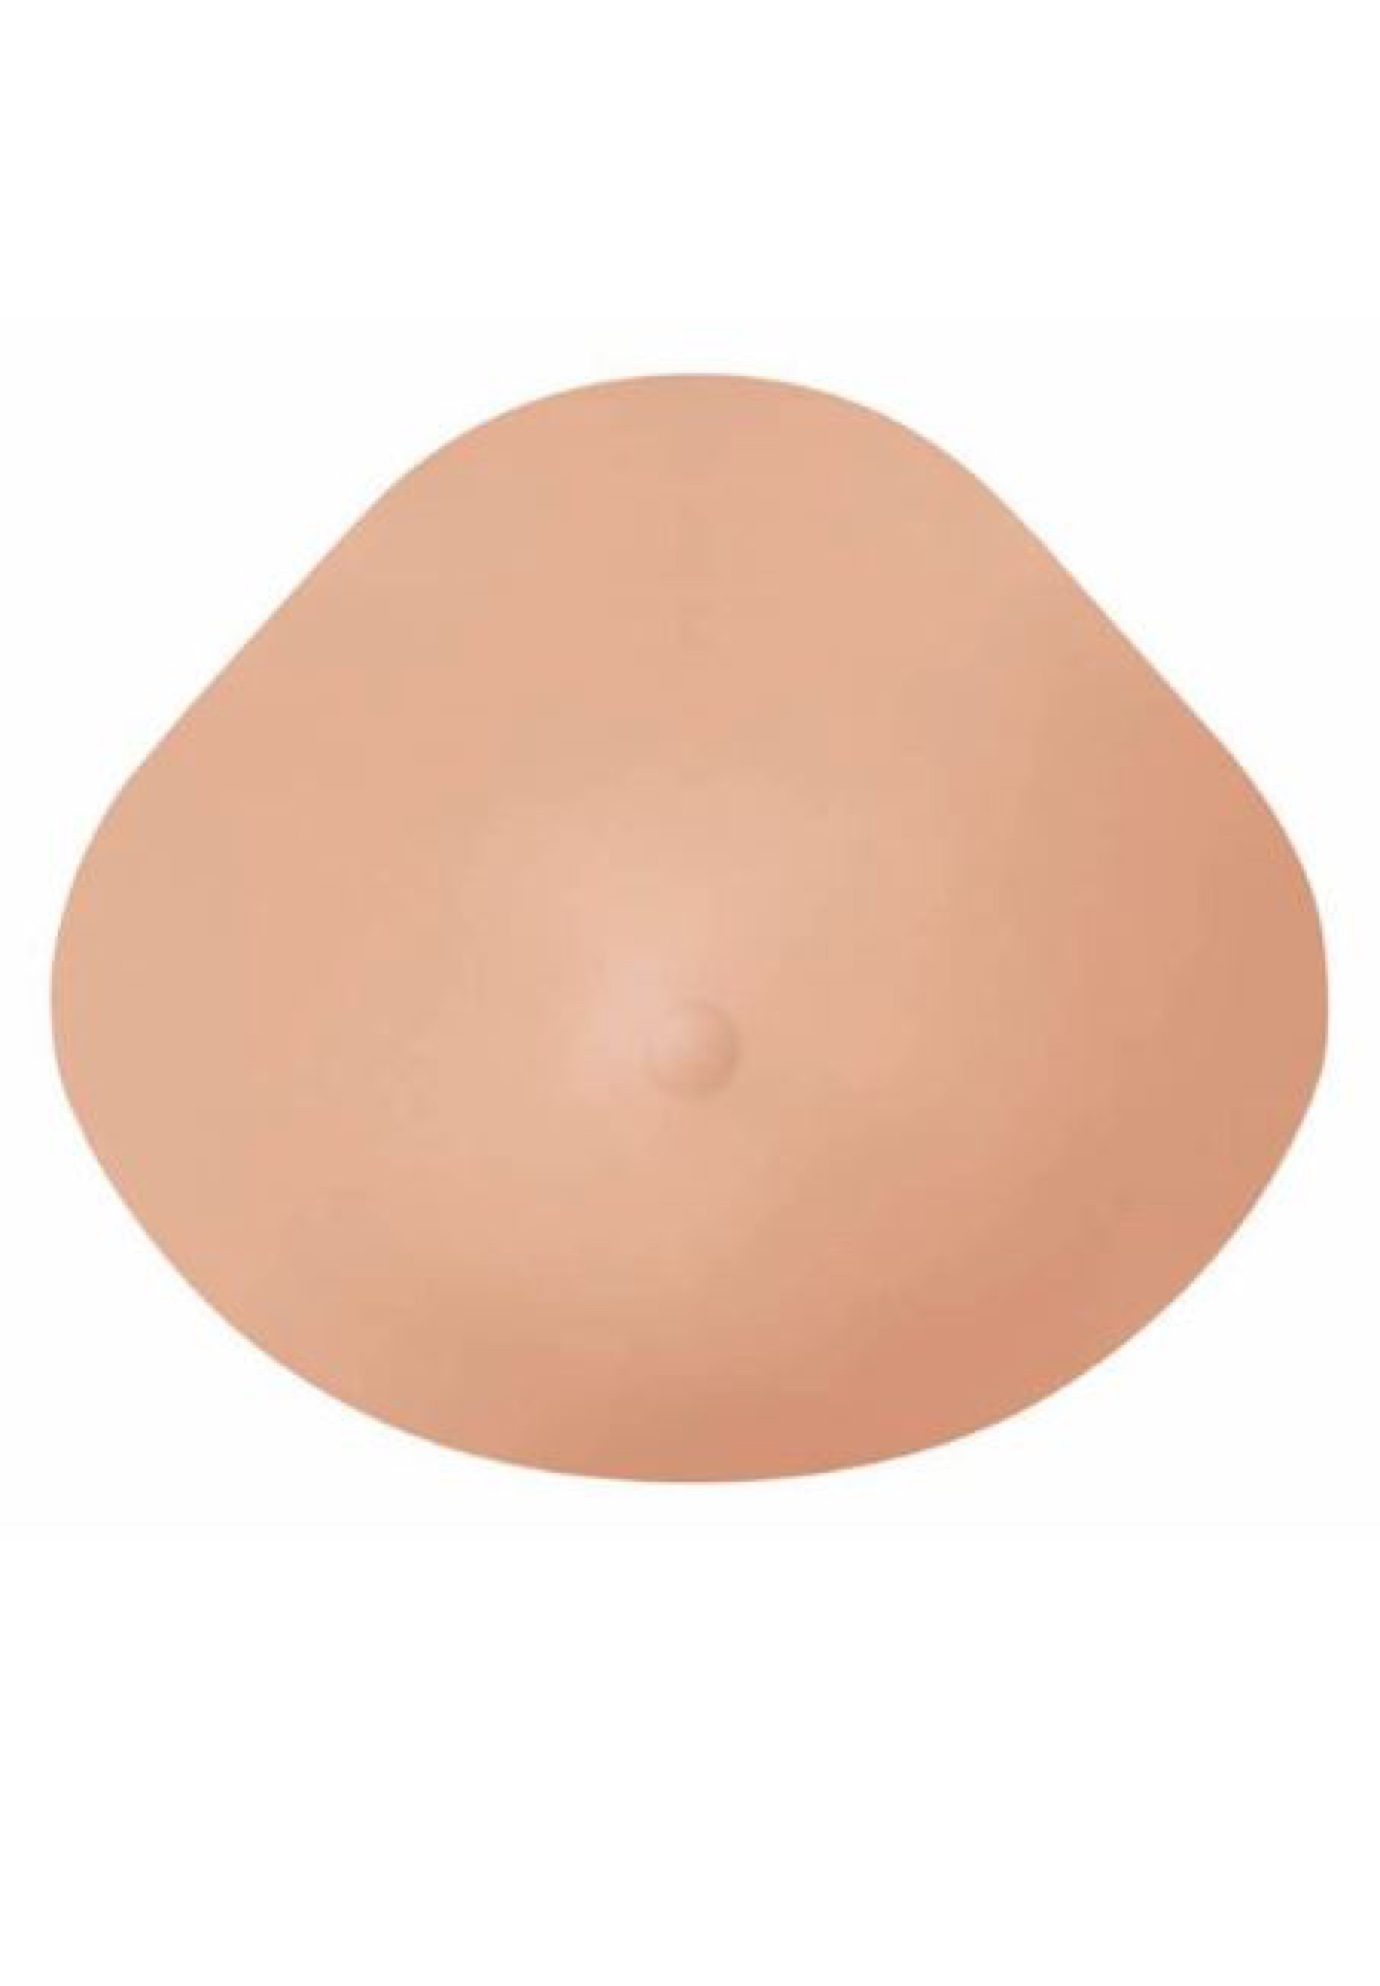 How To Put On Breast Forms